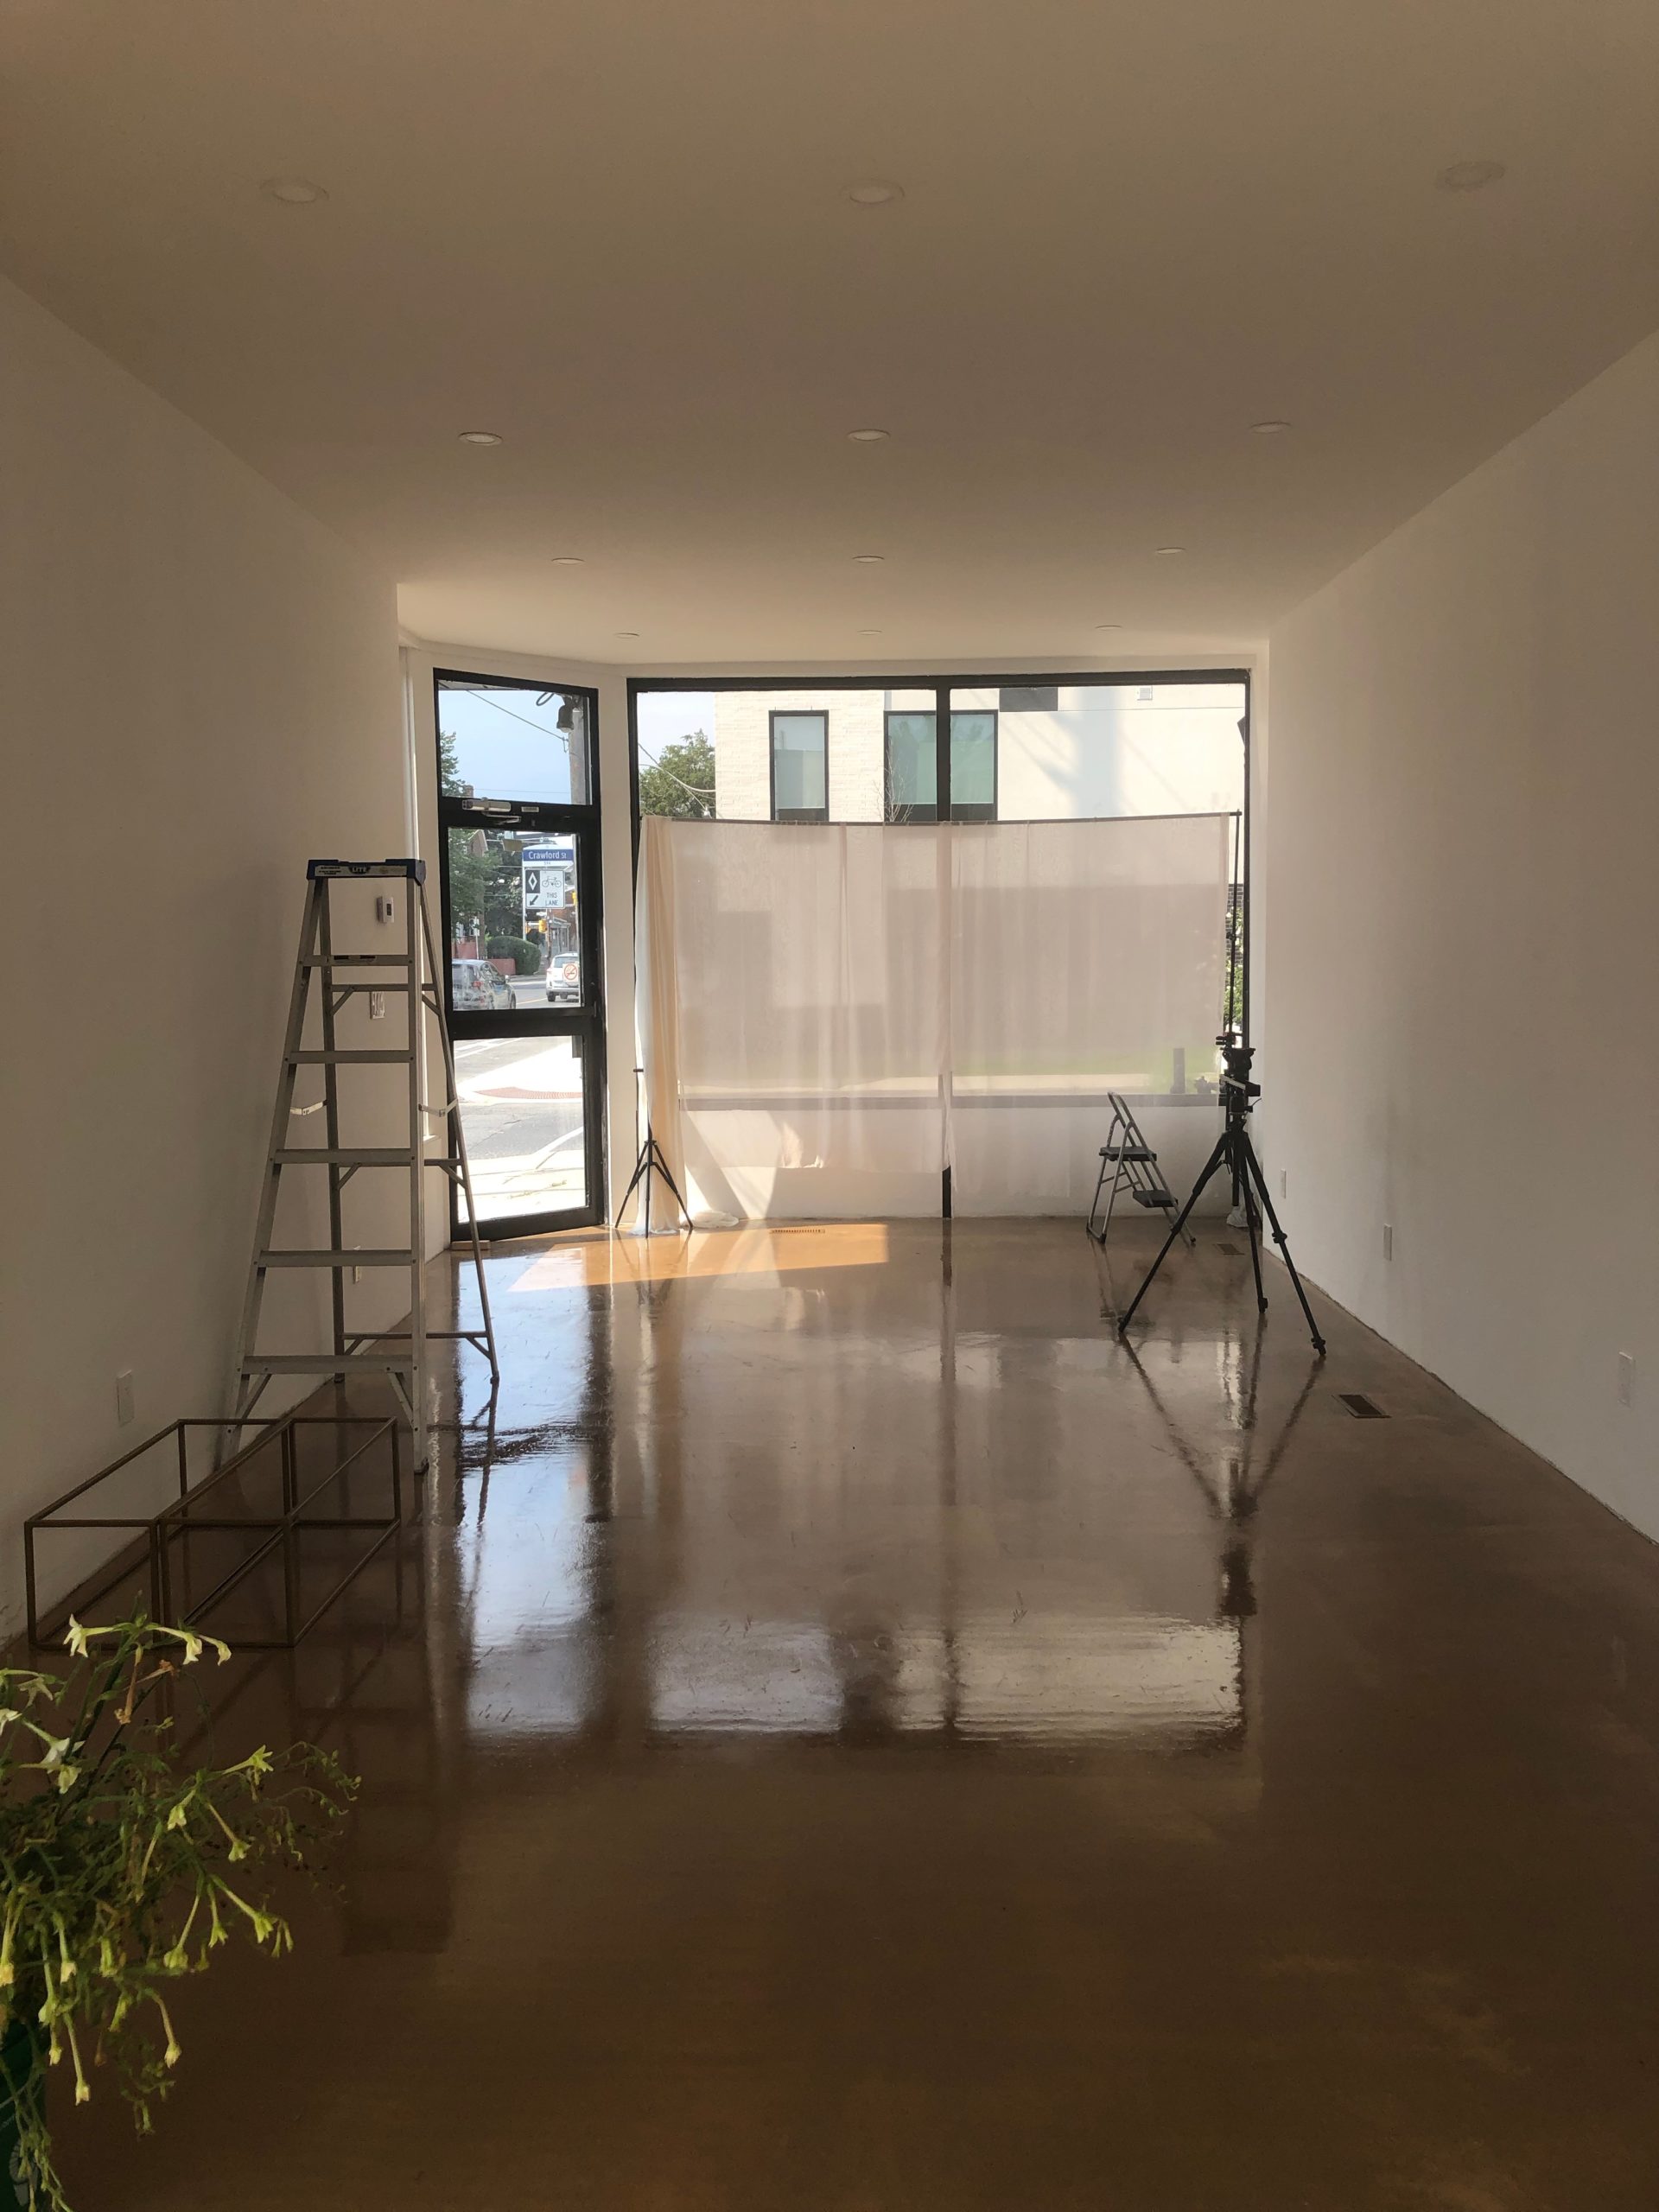 An almost empty shop, concrete floors, white walls and a ladder